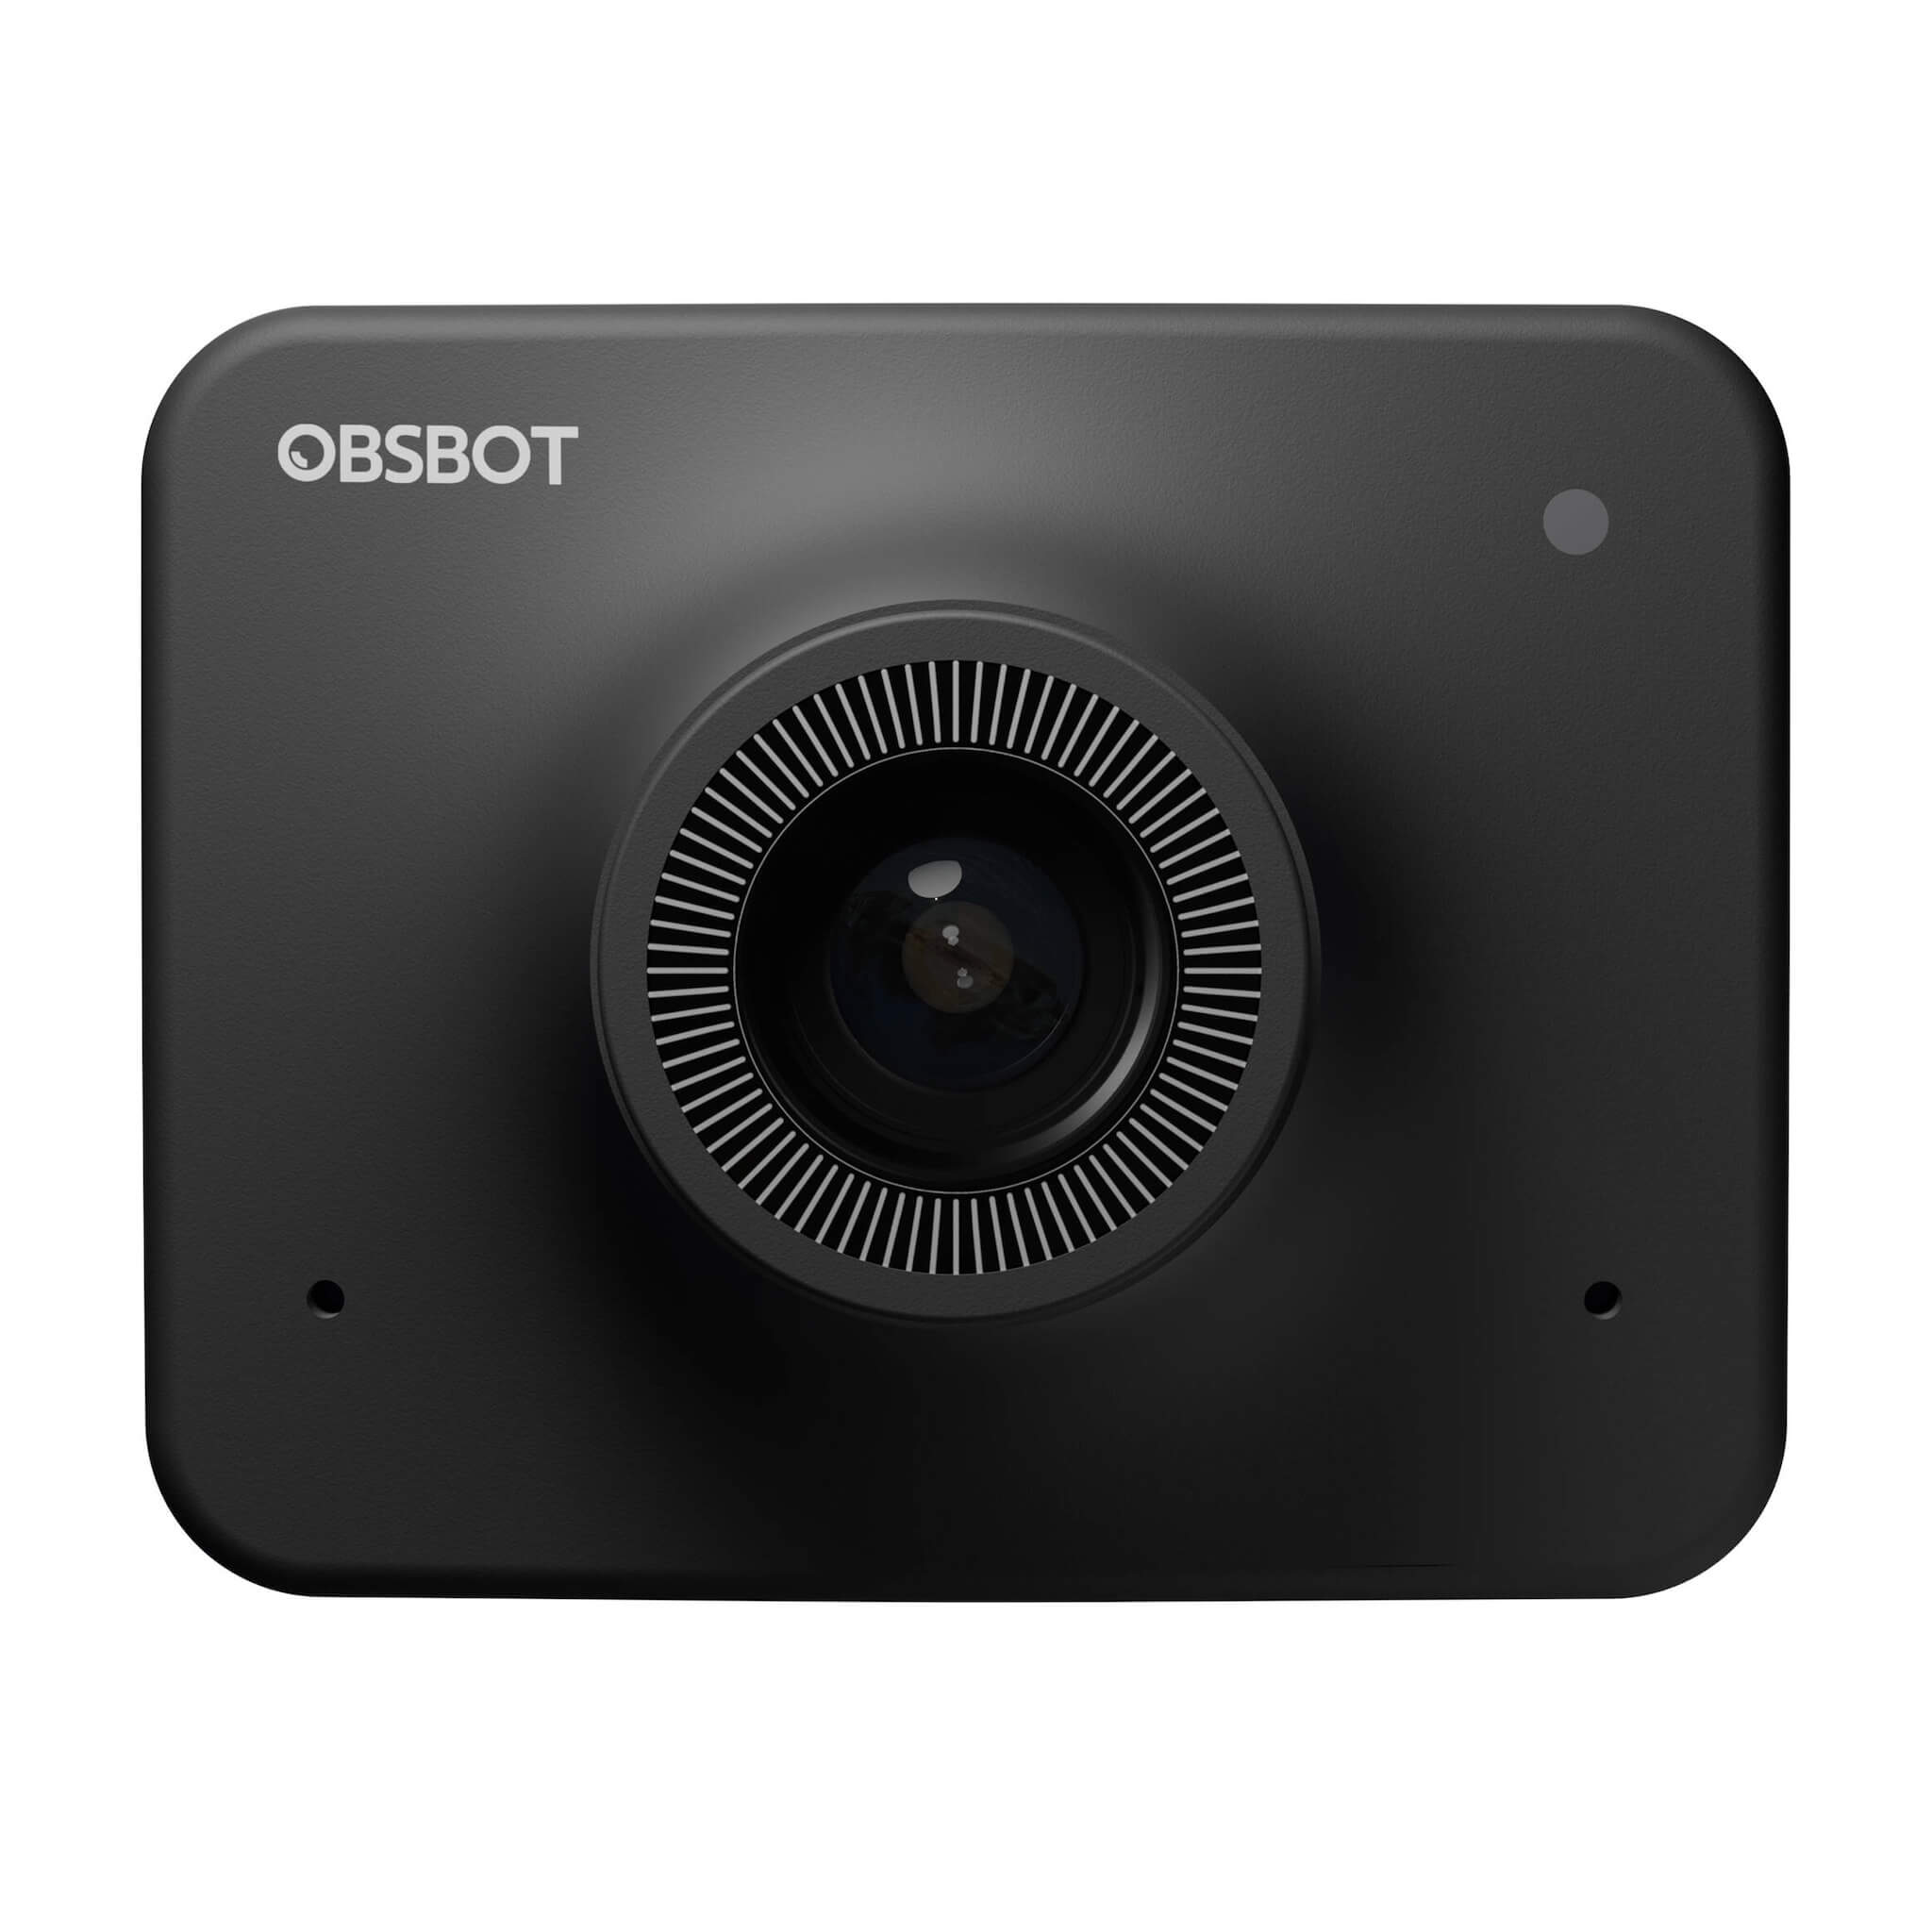 OBSBOT Meet HD - AI-Powered 1080p Auto-Framing PC Web Camera, front